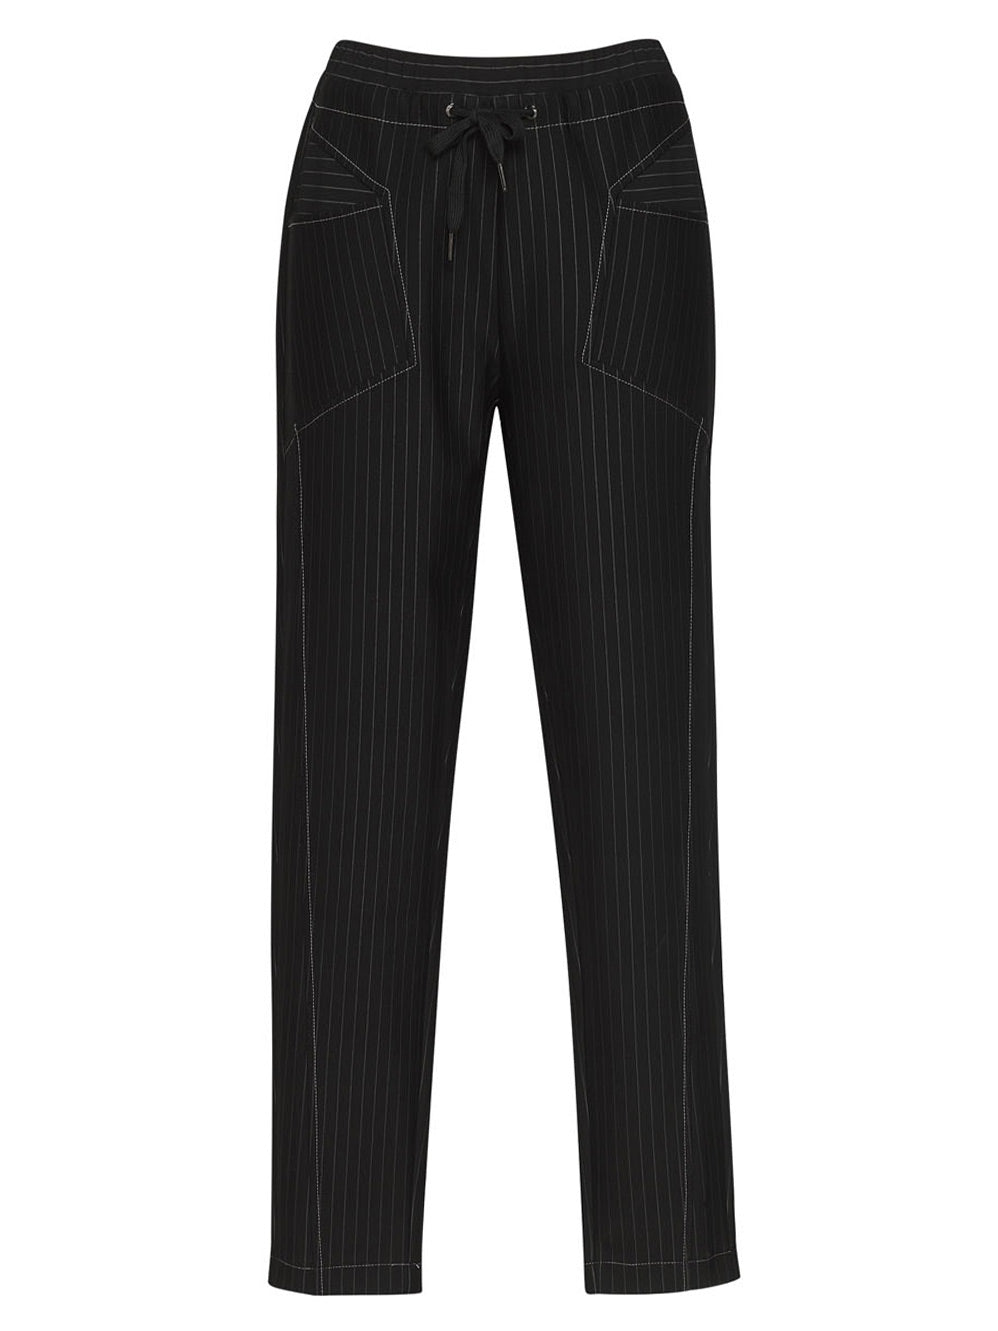 MADLY SWEETLY SPECTRE PANT